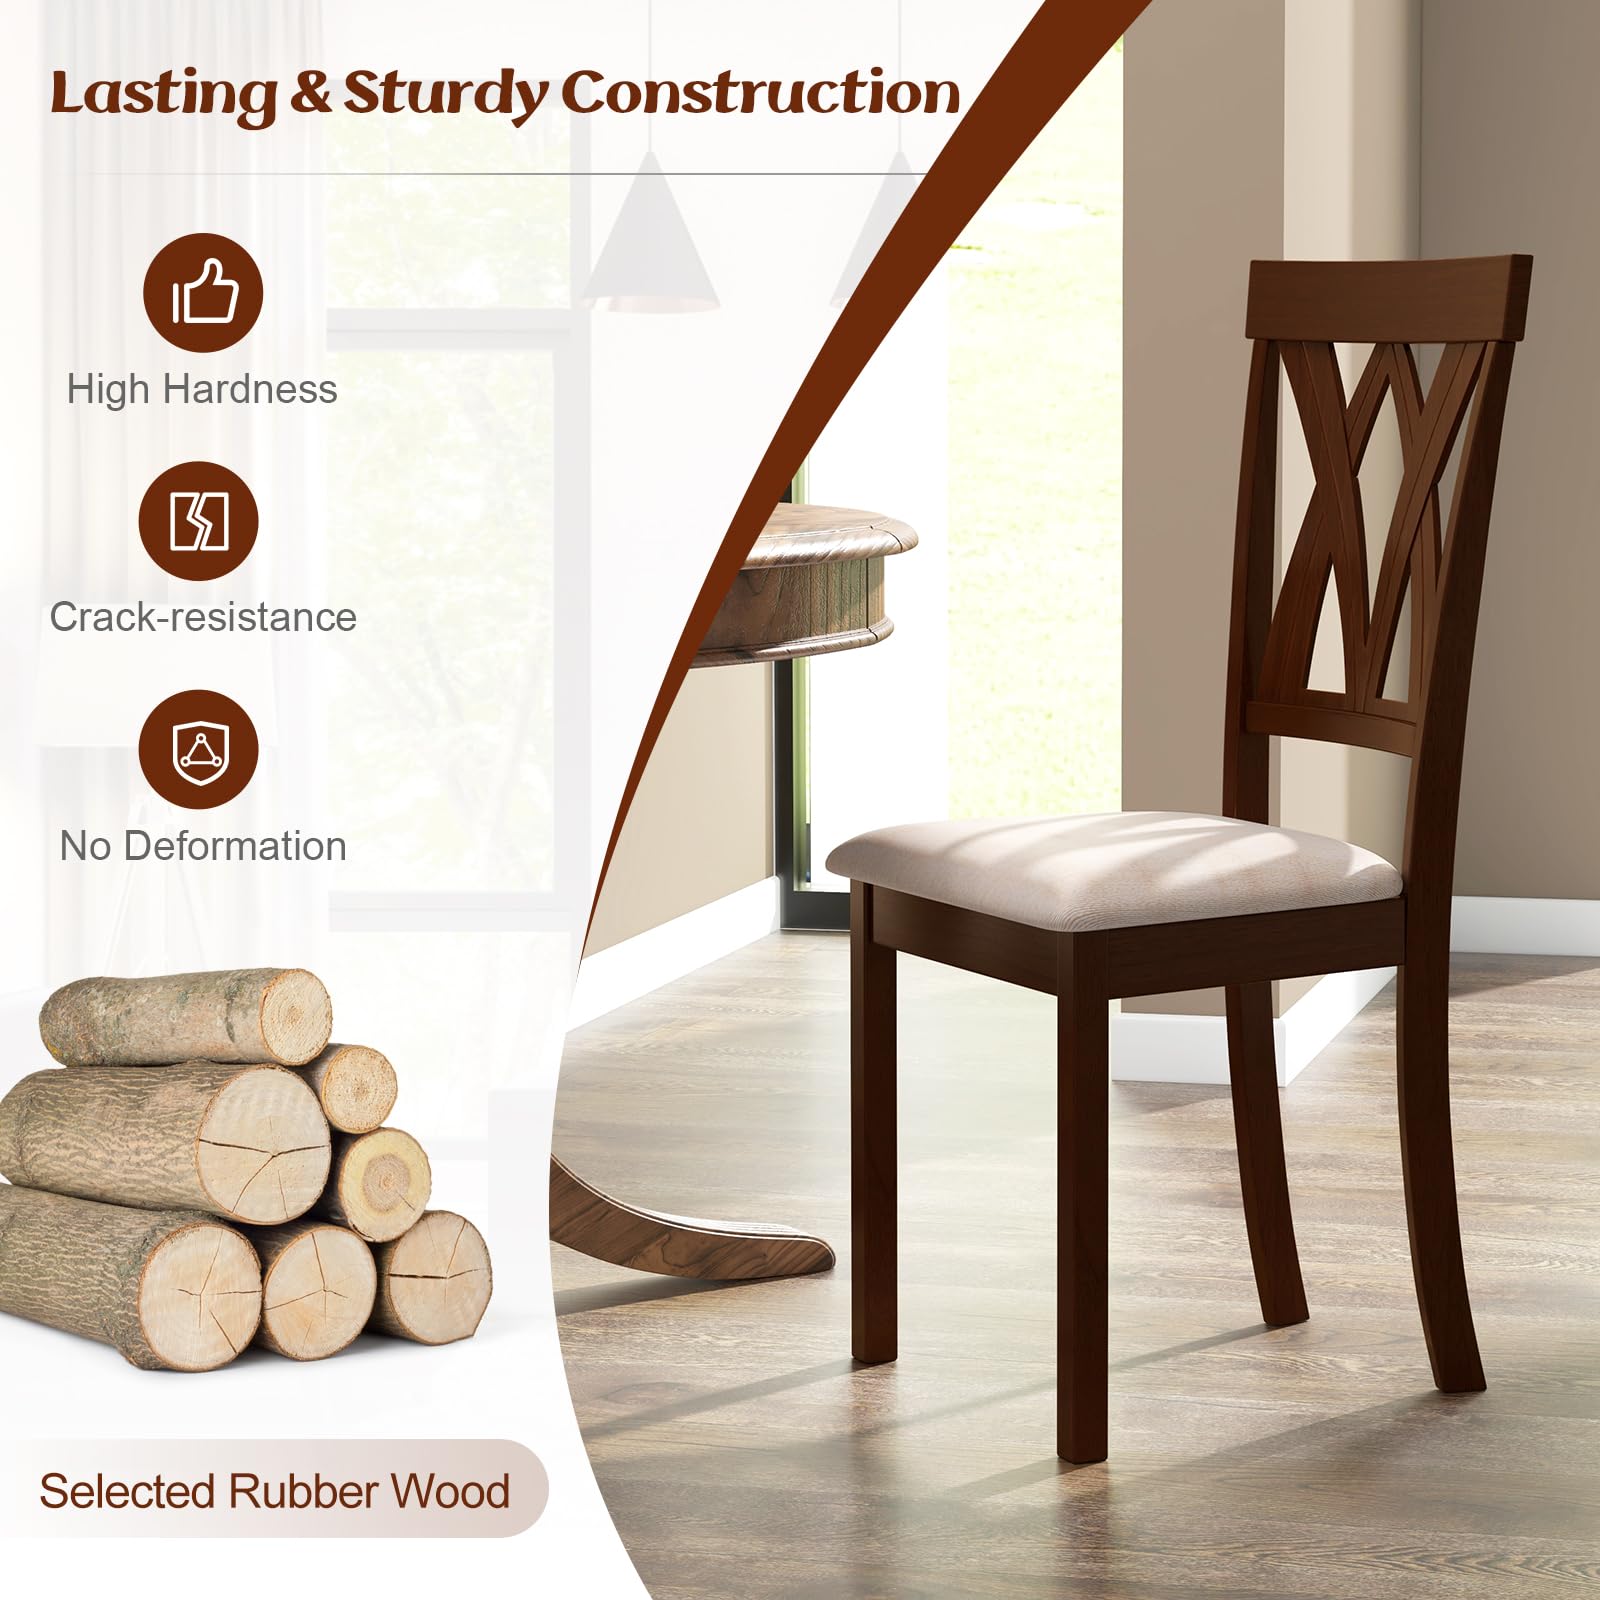 Giantex Wood Dining Chair, Wooden Kitchen Chairs with Upholstered Seat